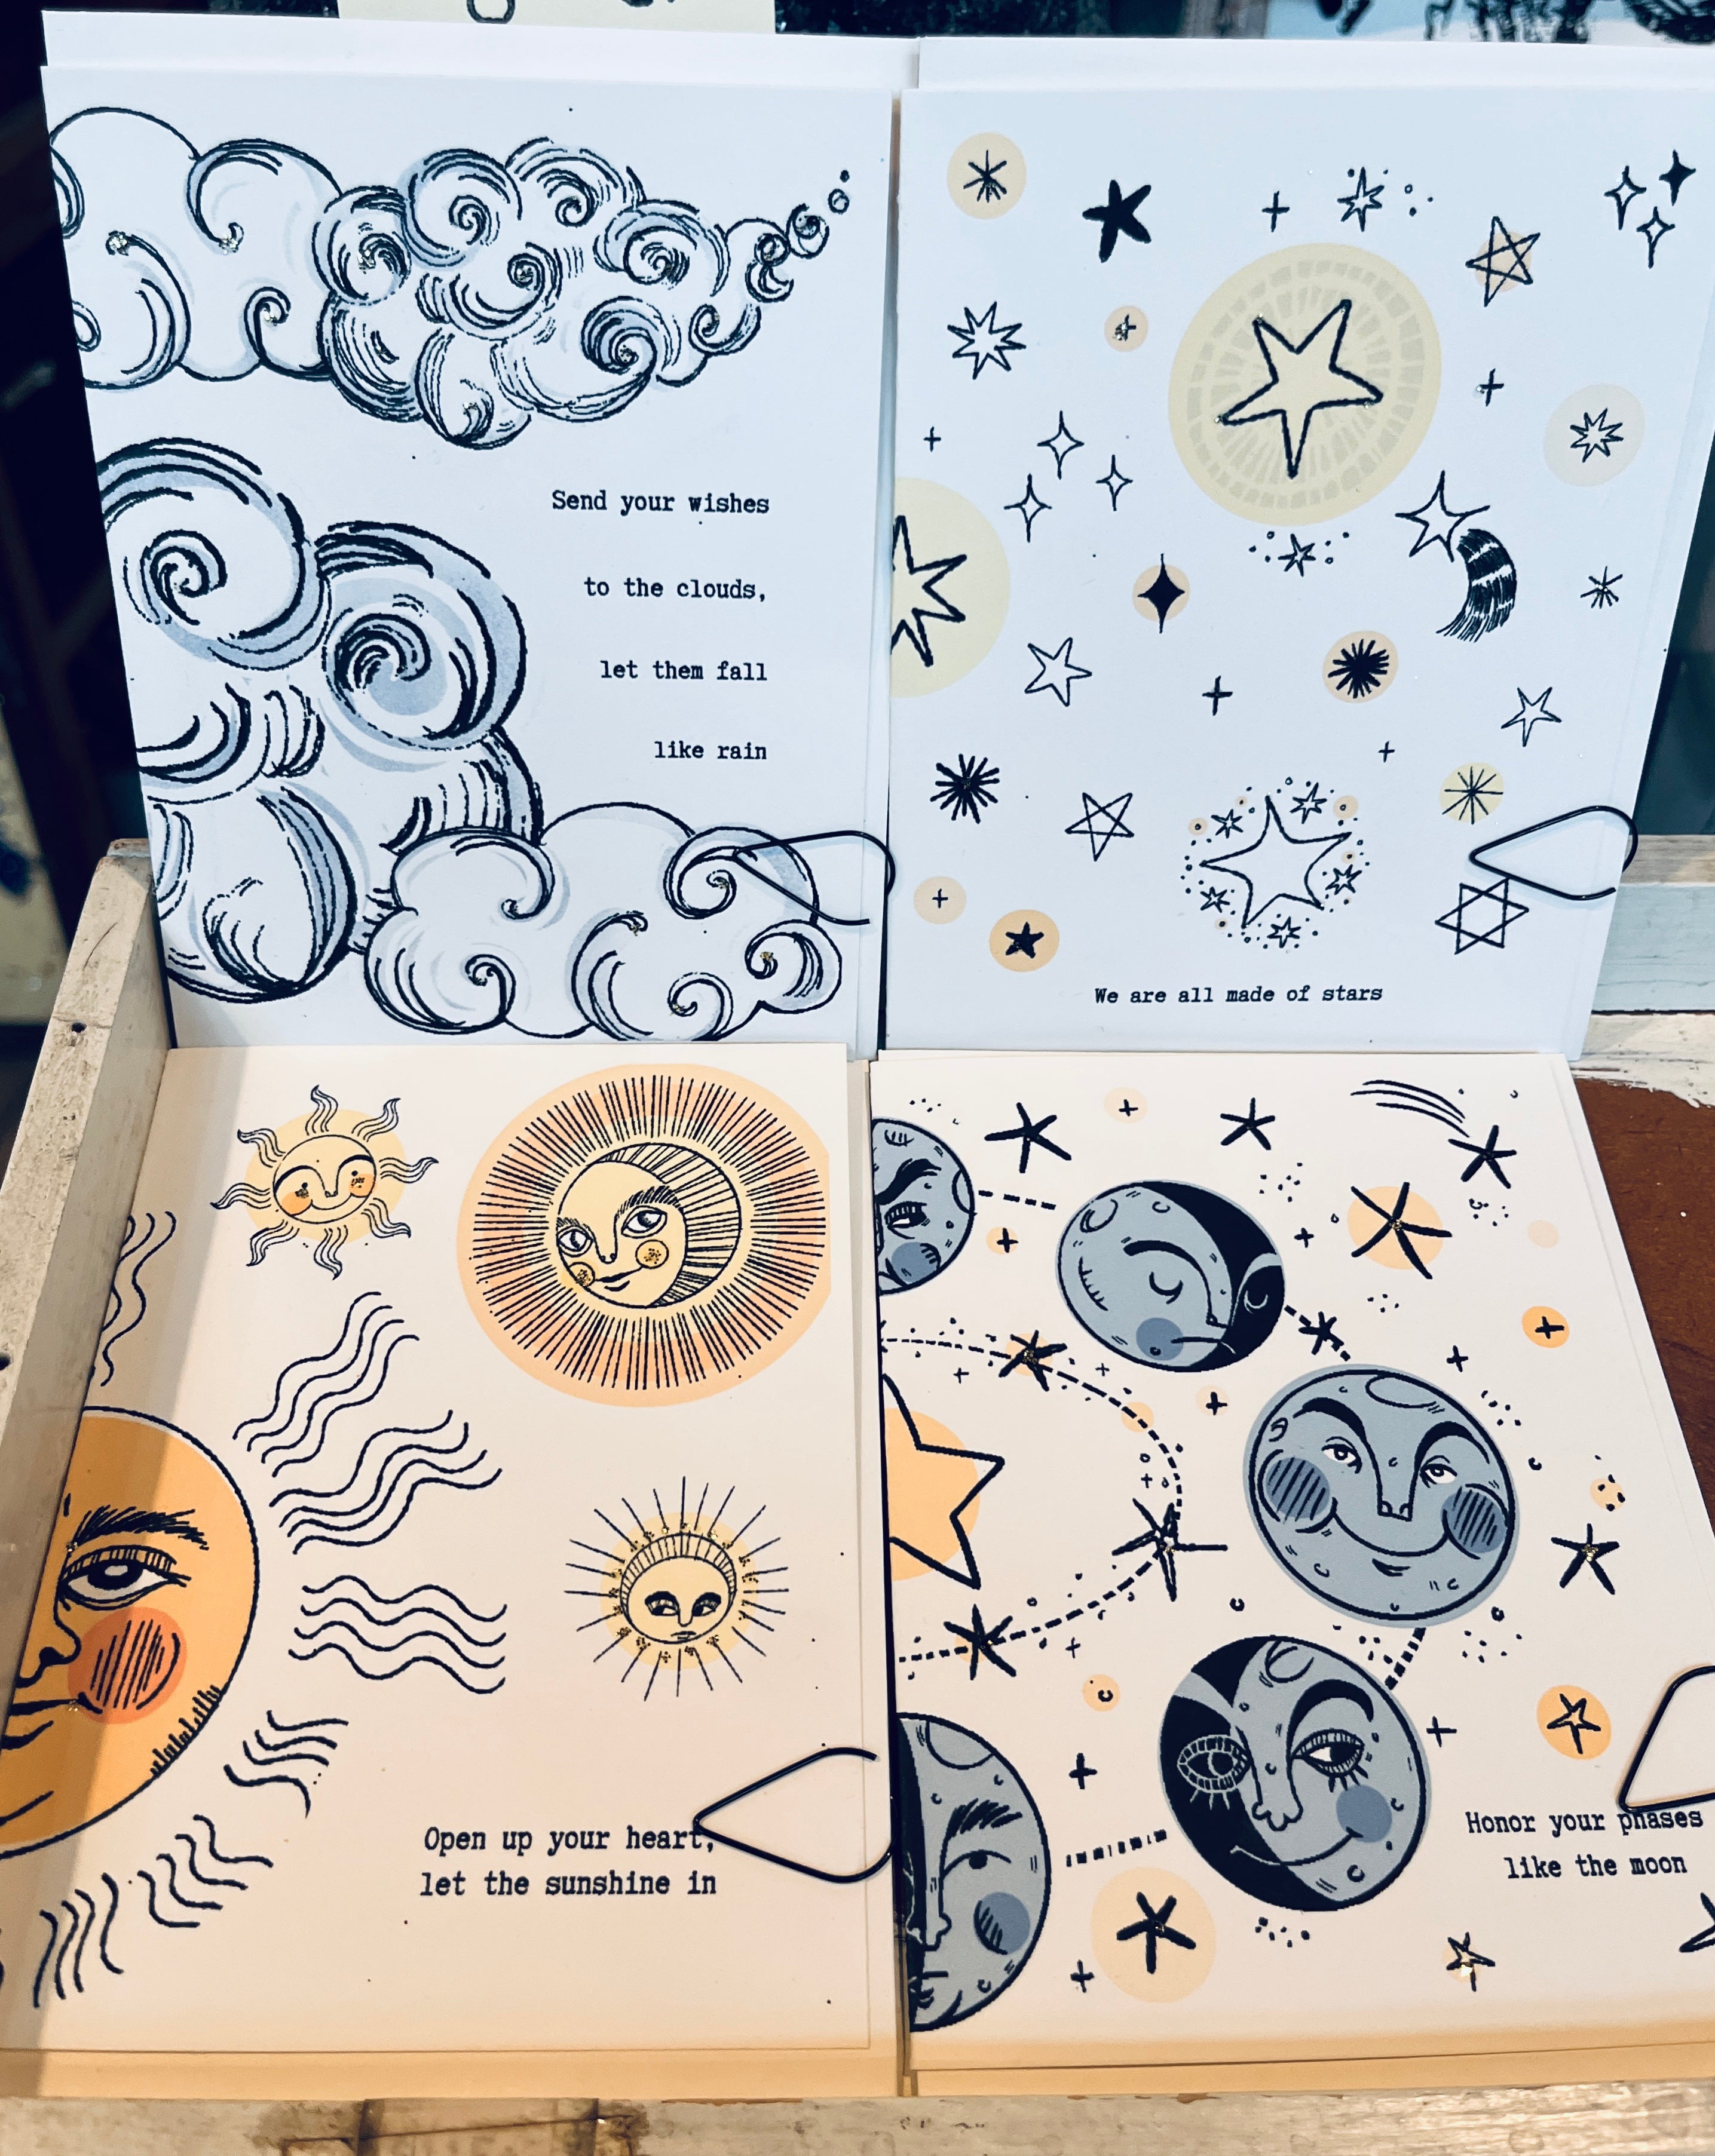 Suns, Moons, Stars and Clouds Greeting Cards